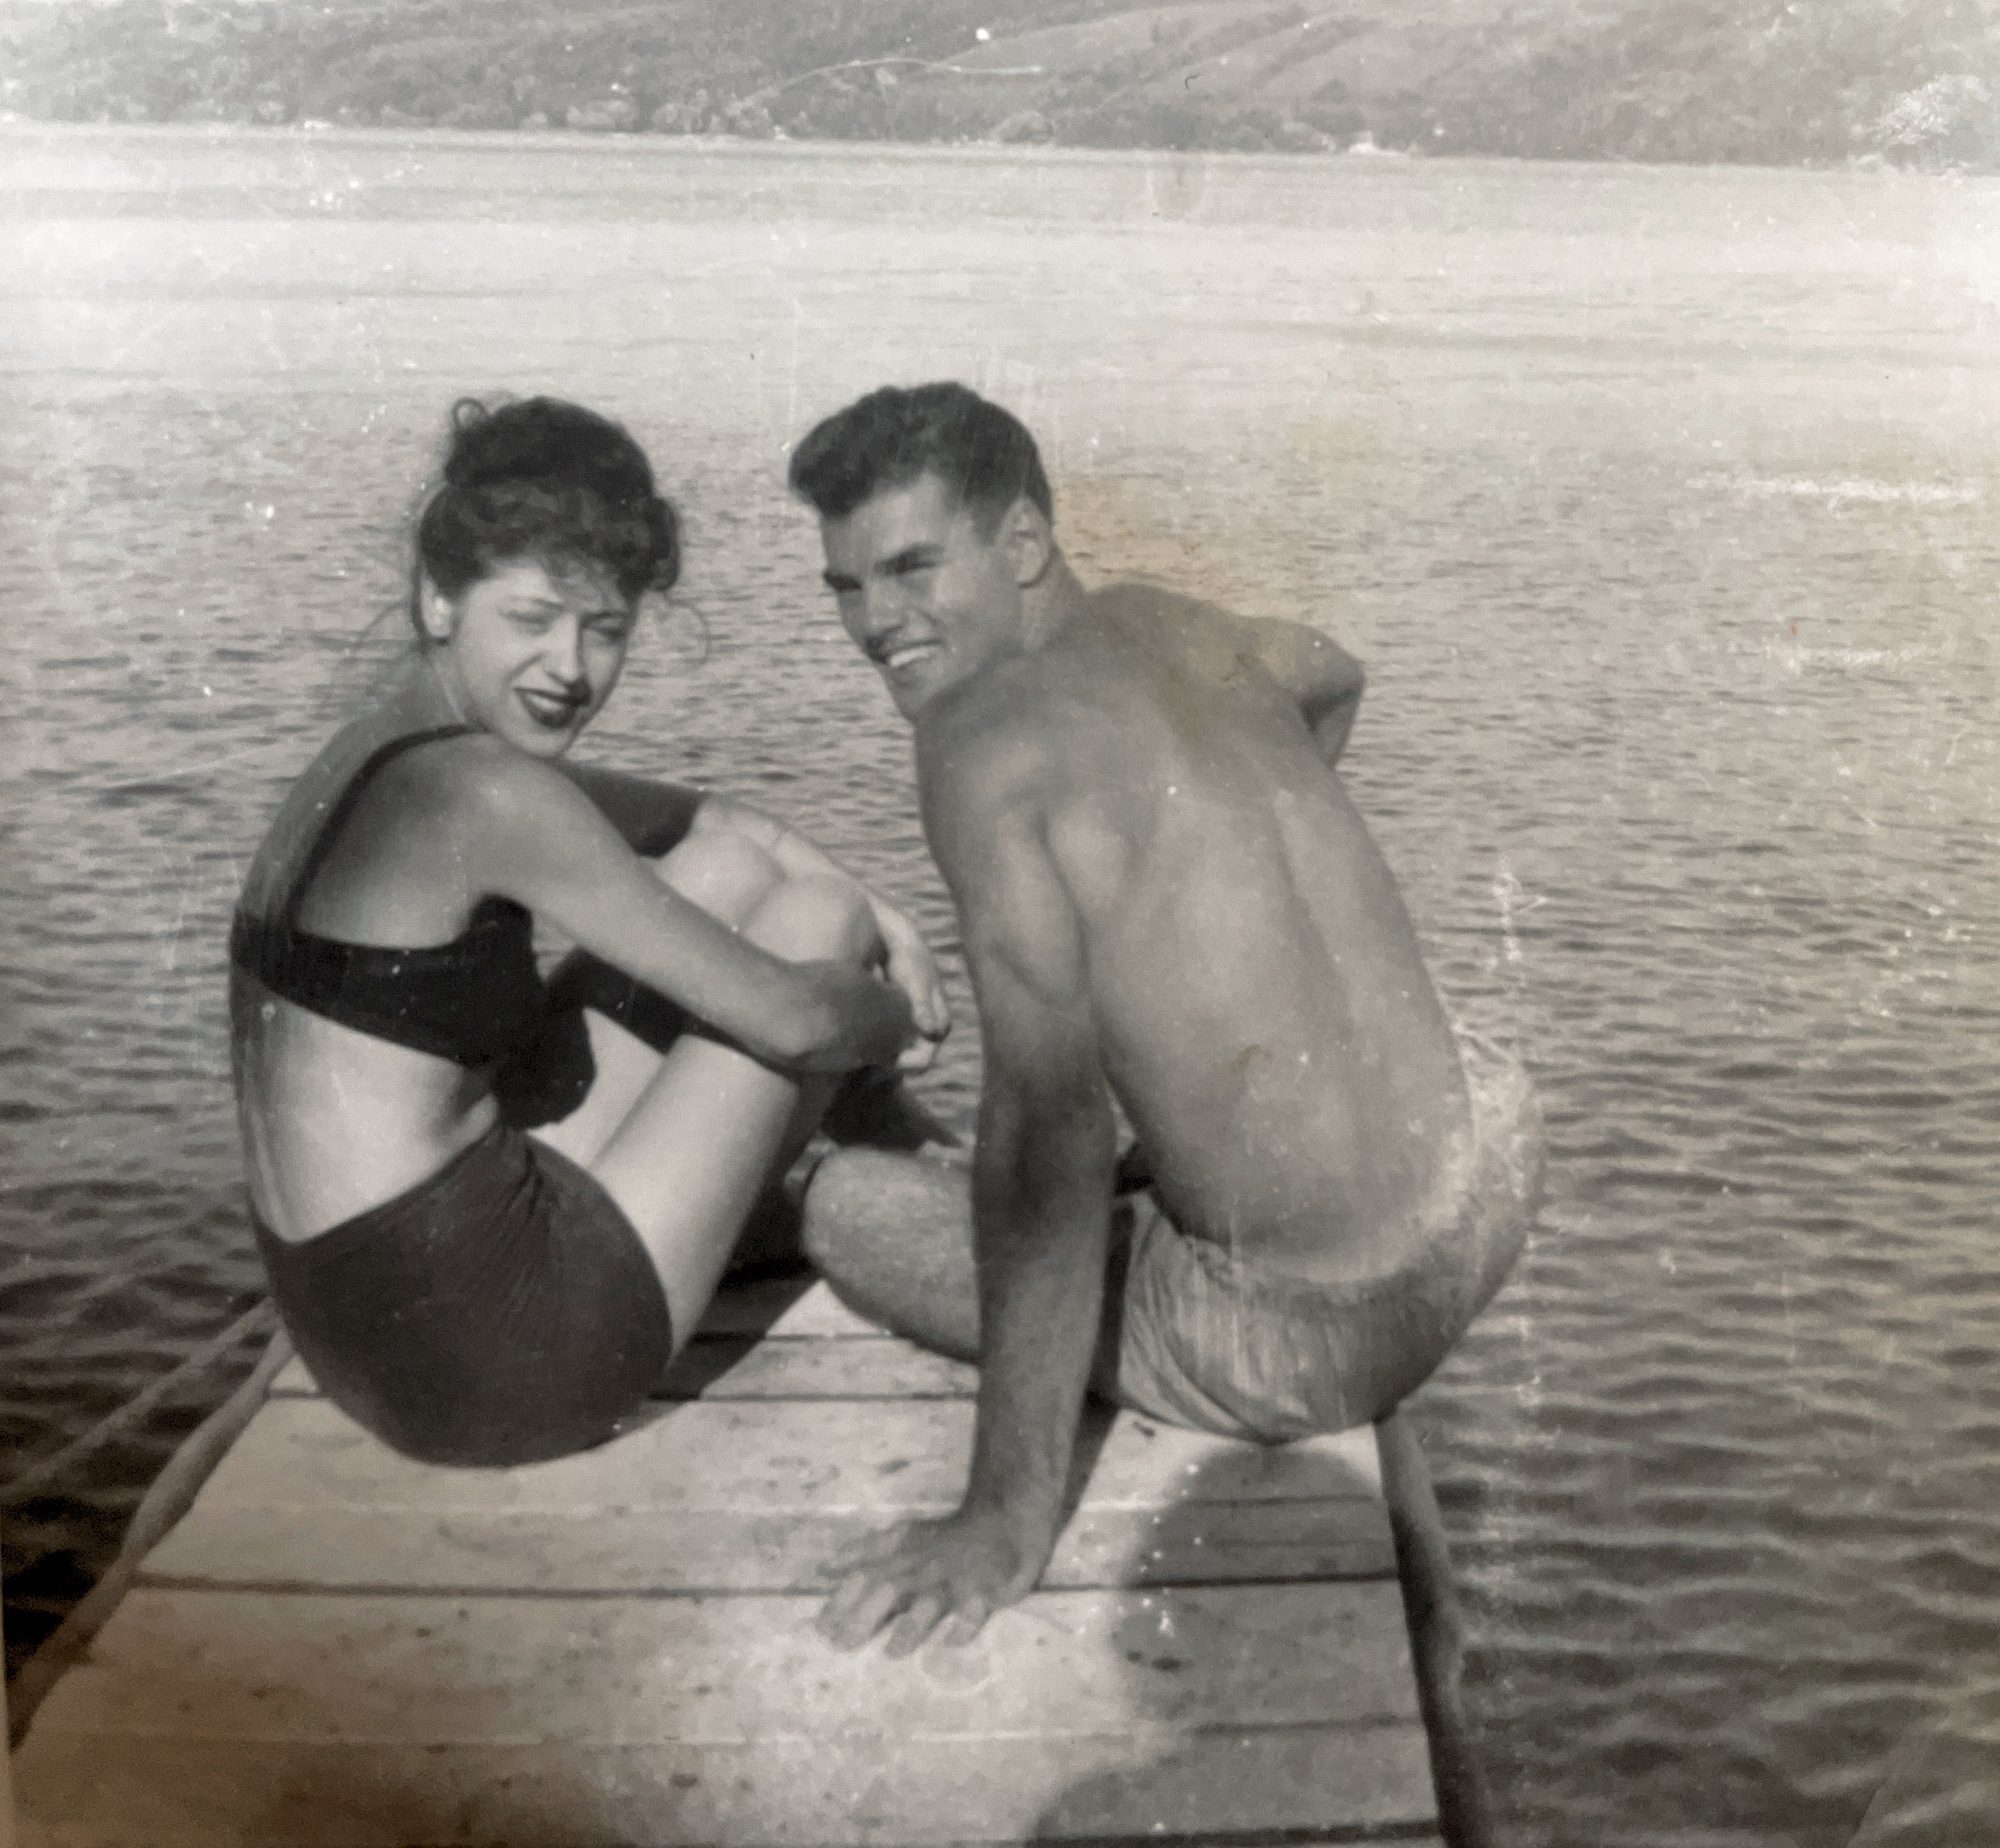 Dick and Mary summer of 1948 ❤️